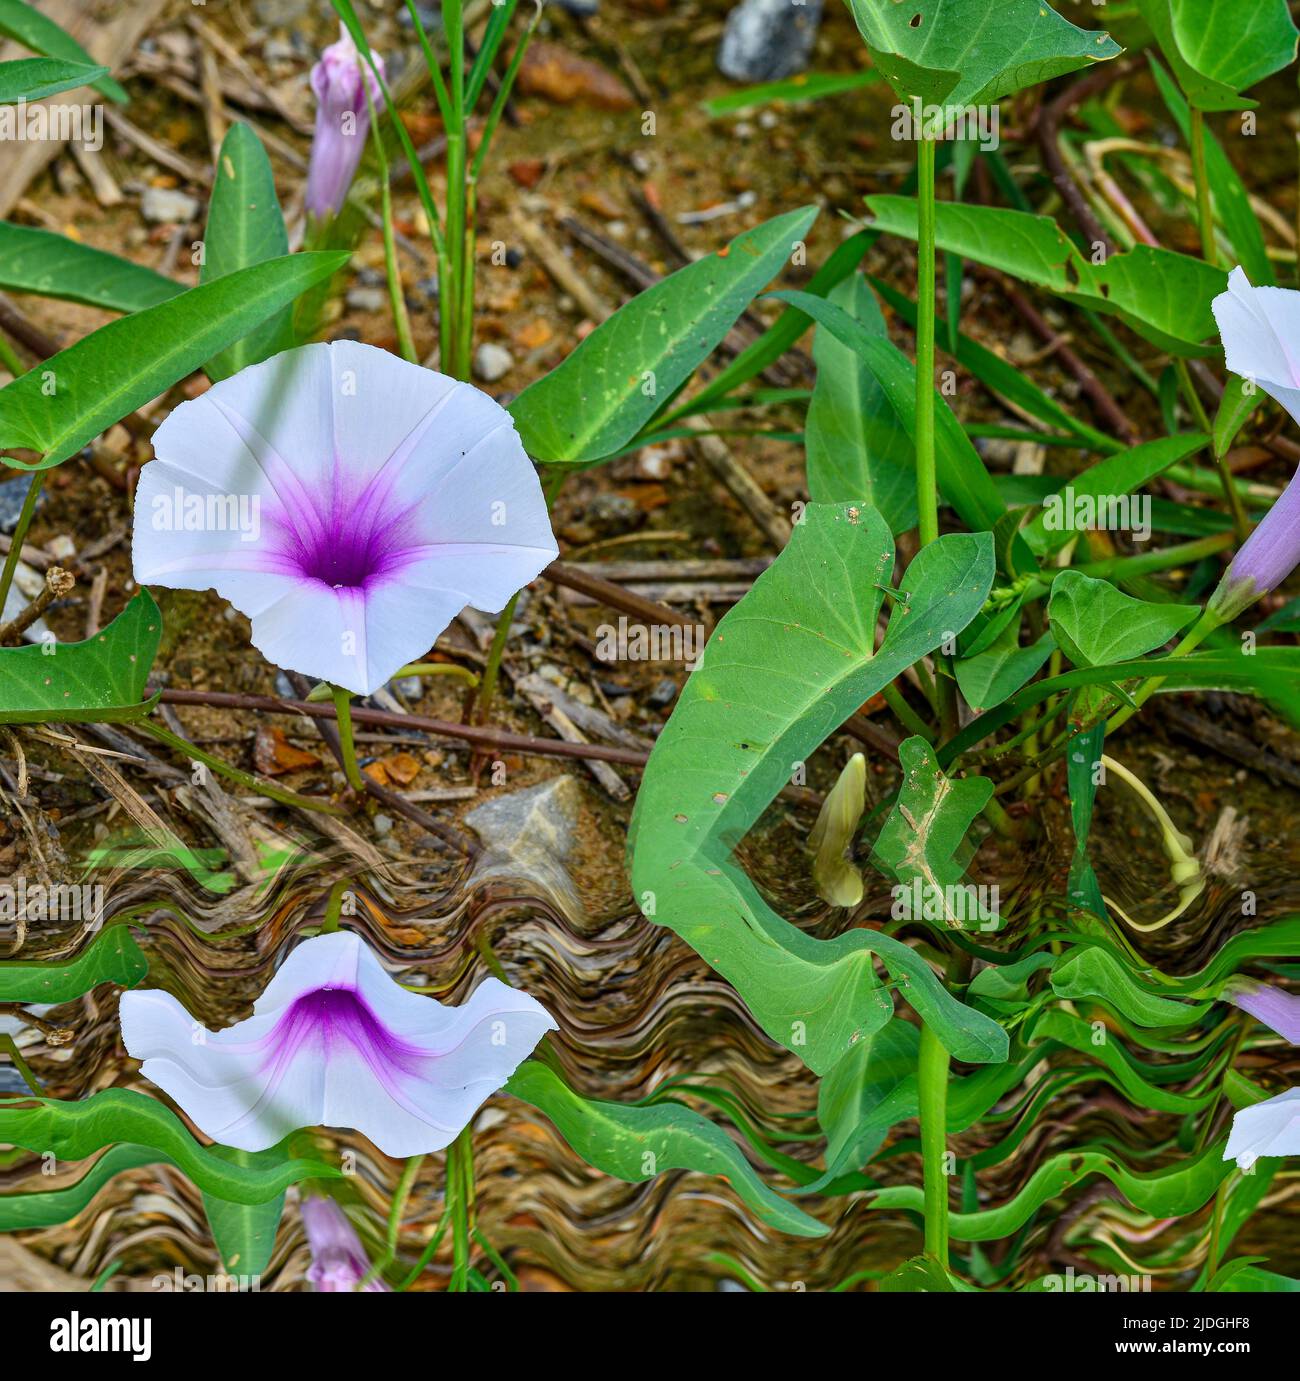 Beautiful morning glory flowers on the ground with refect Stock Photo